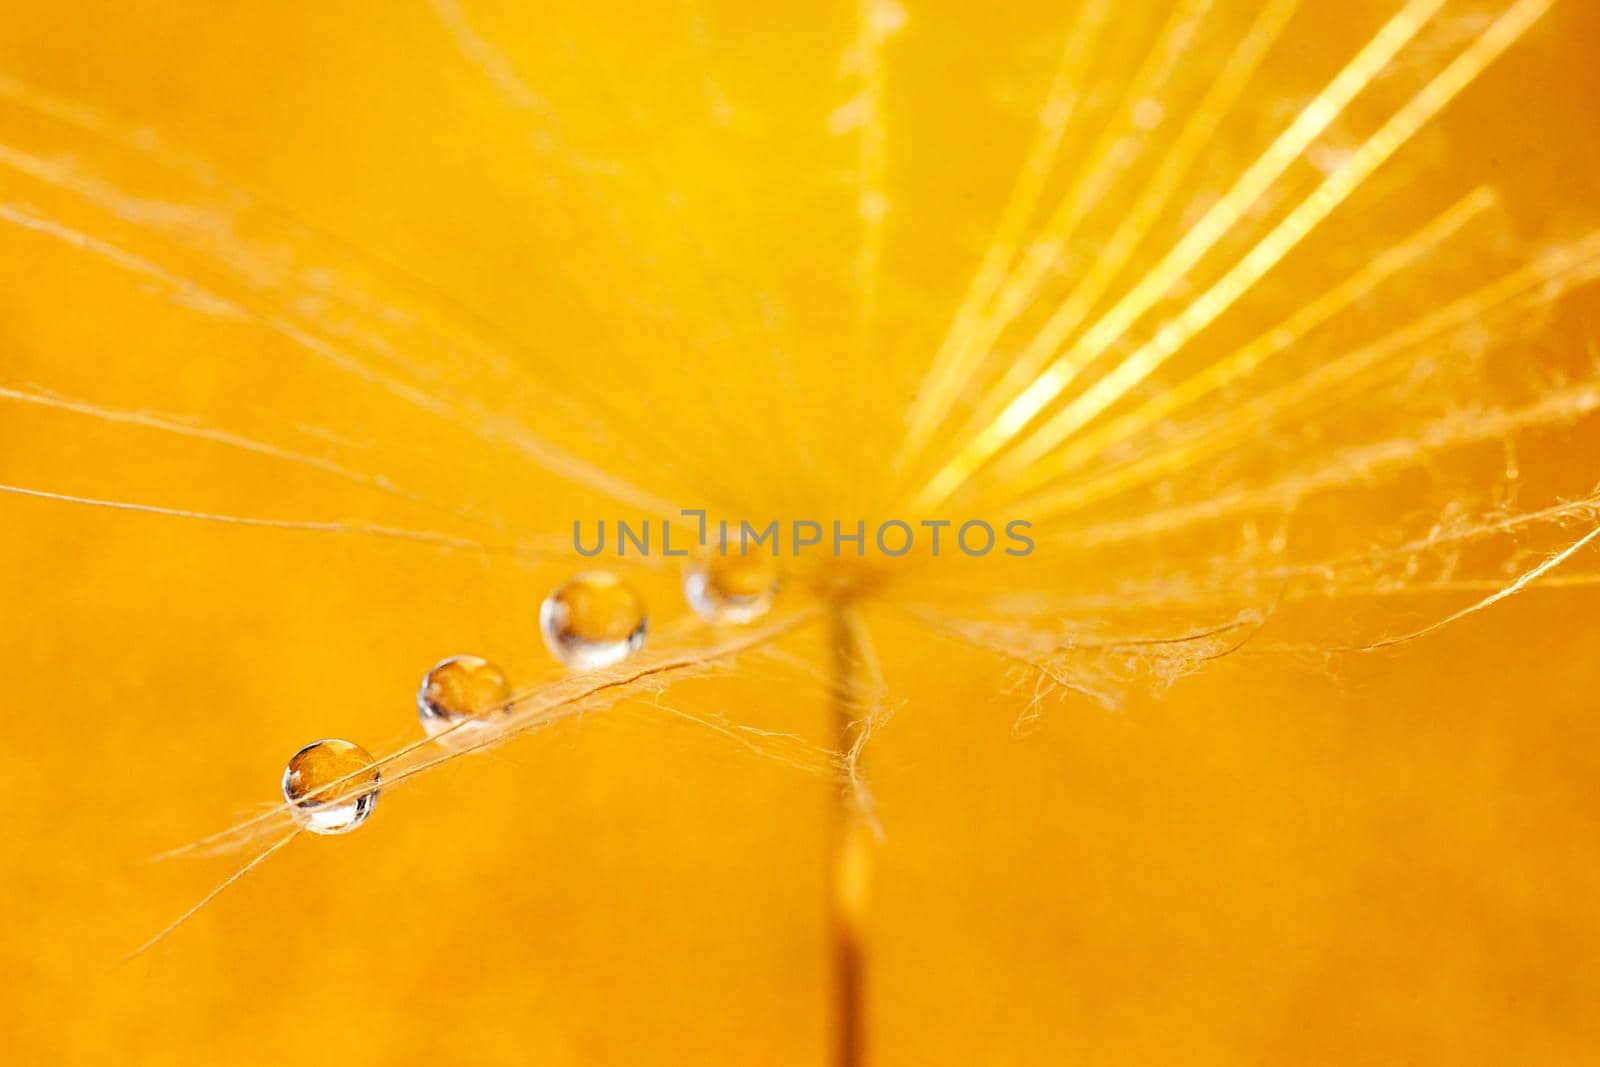 Beautiful dew drops on a dandelion seed. Beautiful soft background. Water drops on a parachutes dandelion. Soft dreamy tender artistic image